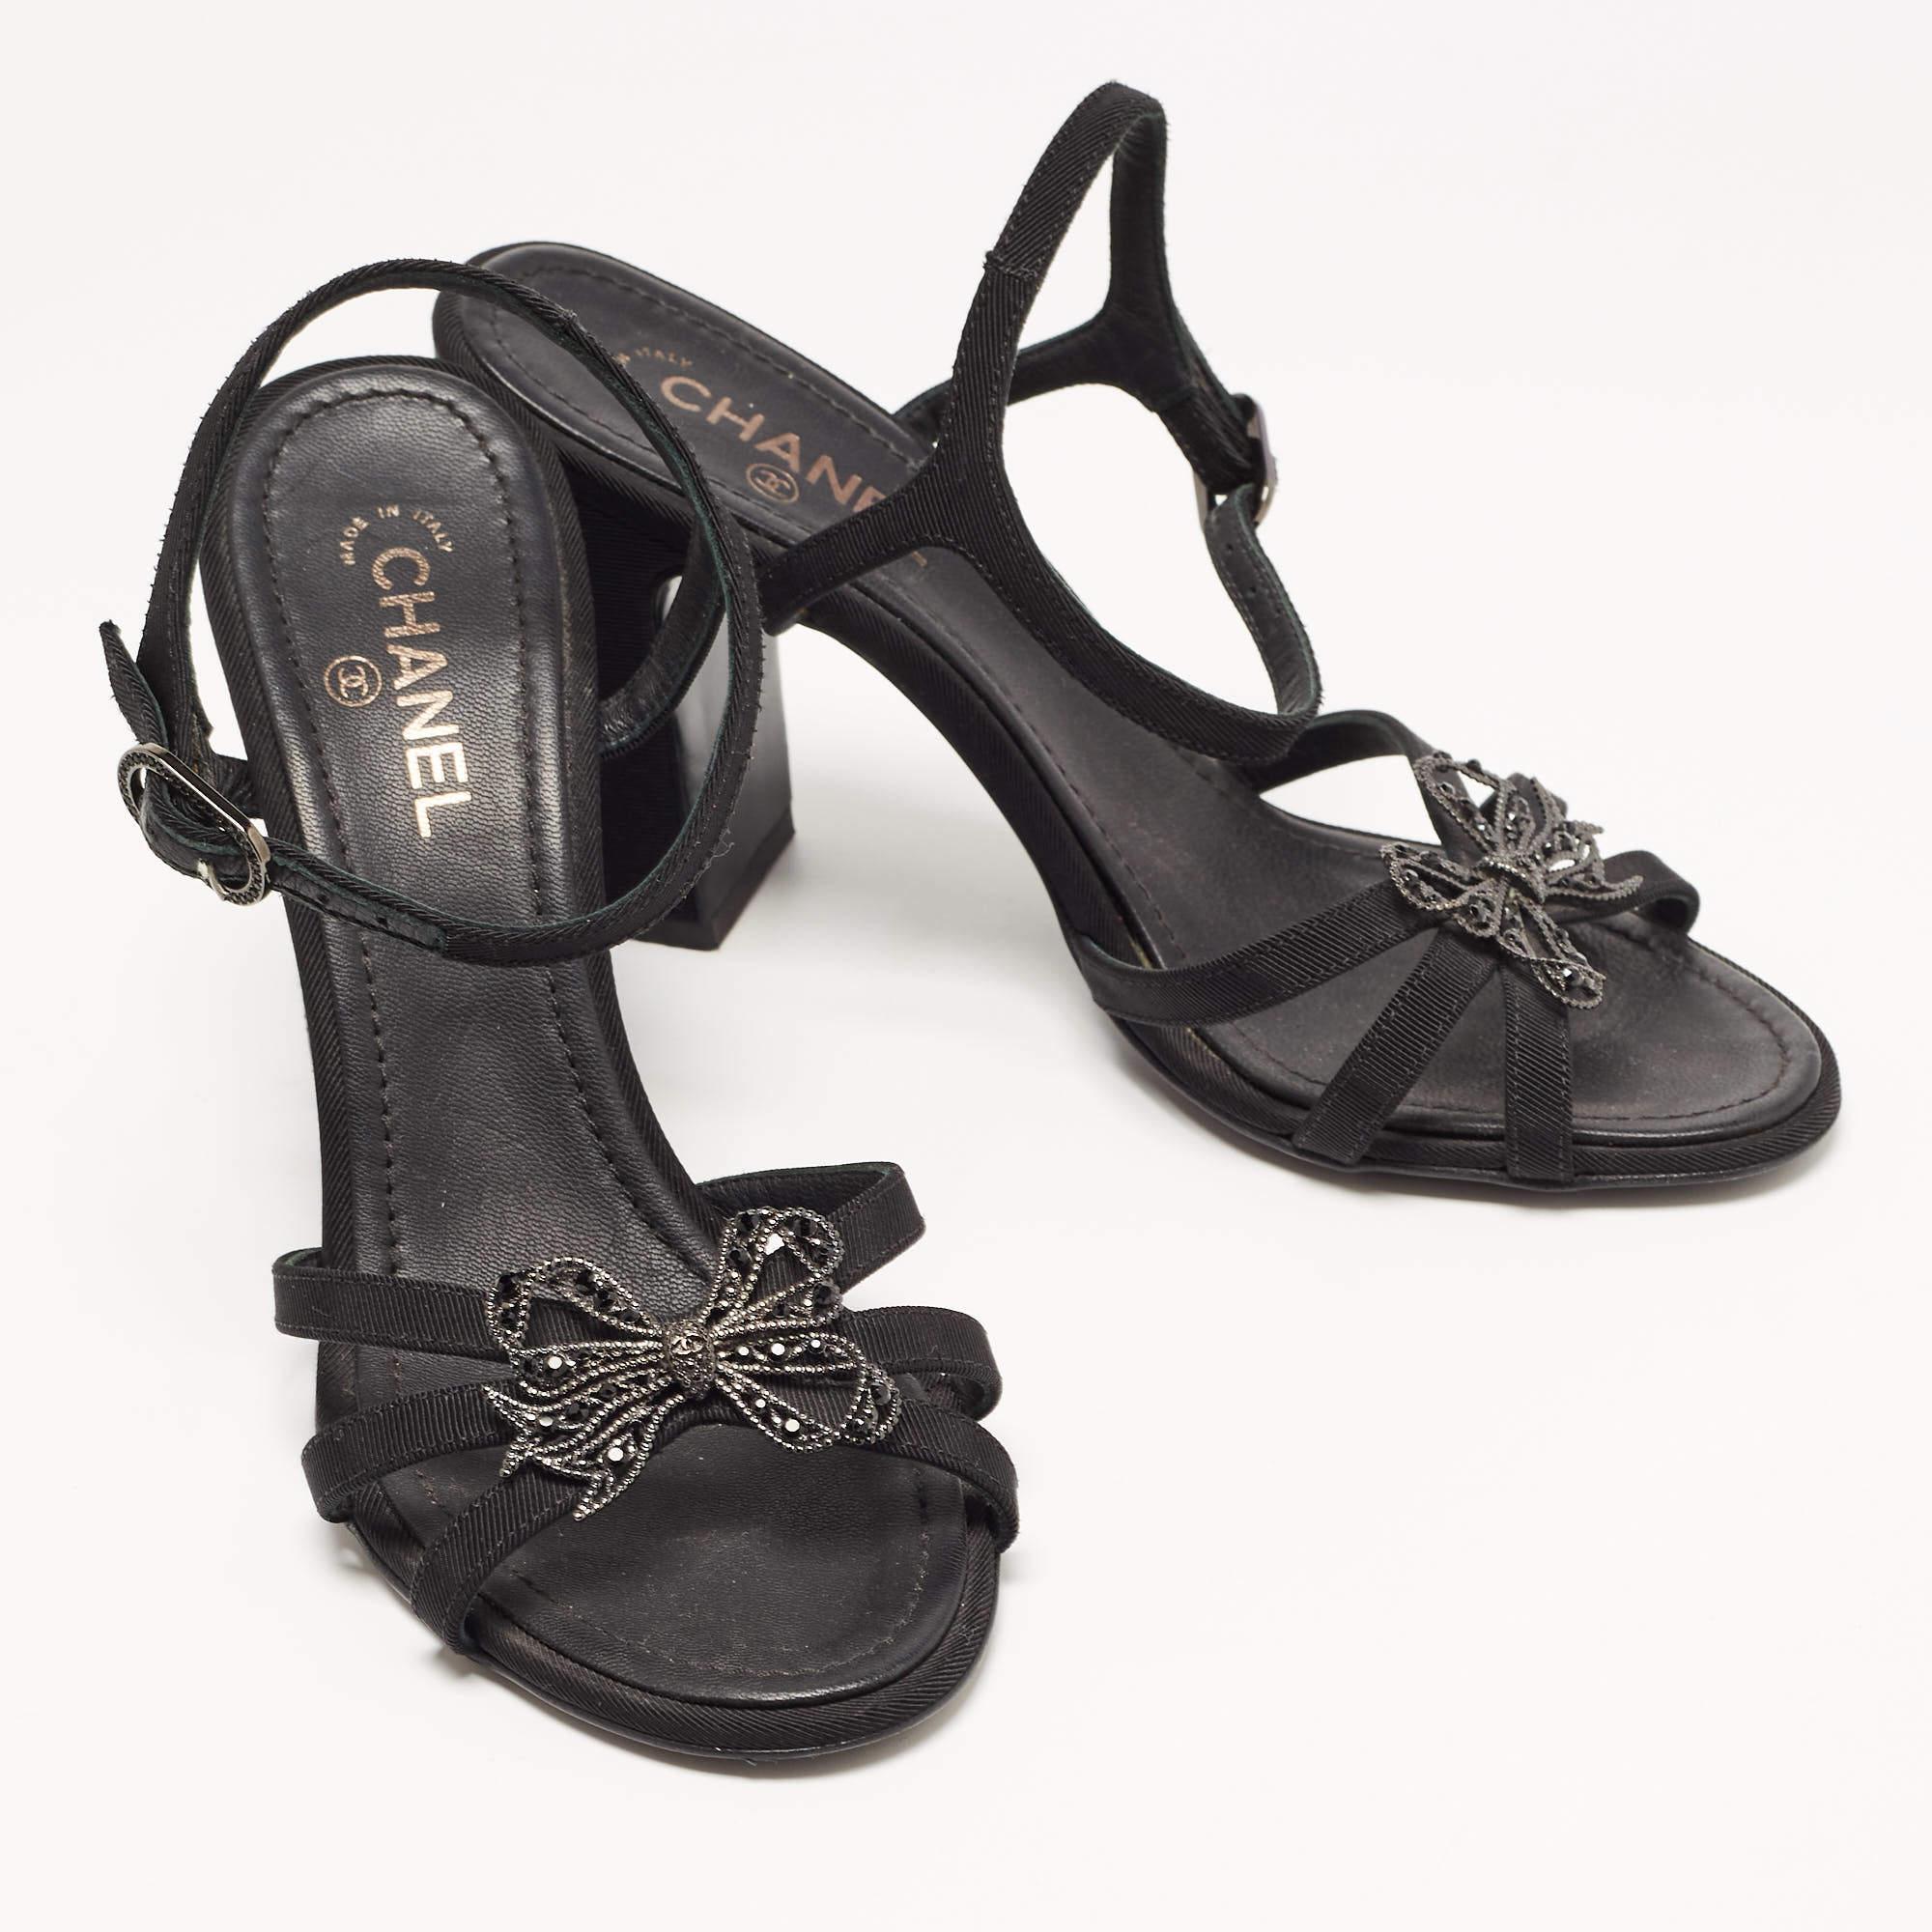 Chanel Black Fabric Embellished Bow Ankle Strap Sandals Size 37 1